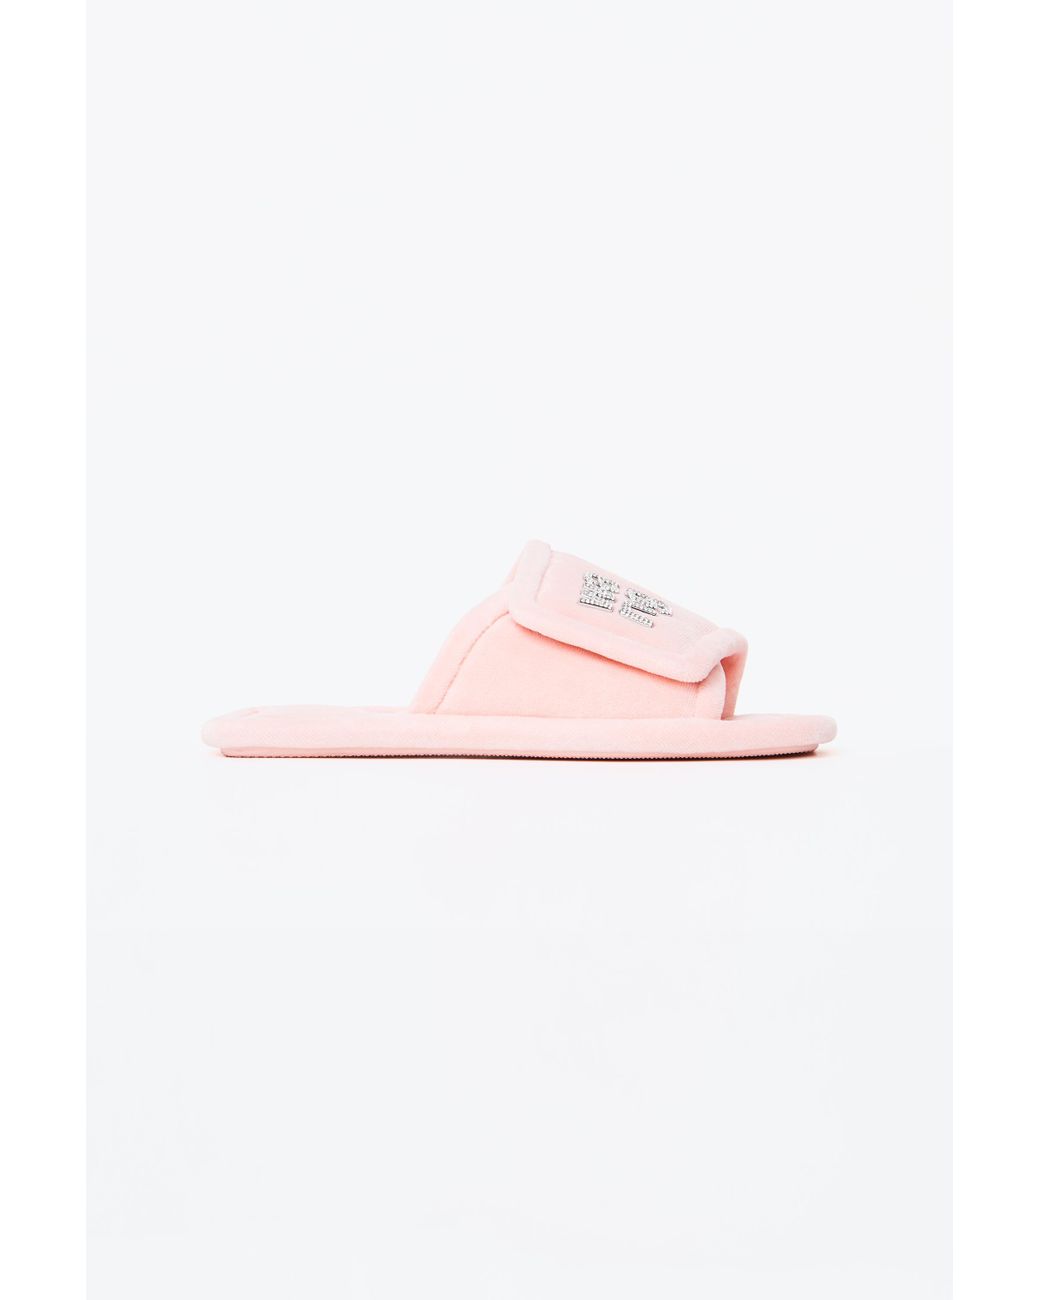 Alexander Wang Rubber Lana Padded Velour Crystal Logo Slippers in Crystal  Rose (Pink) | Lyst